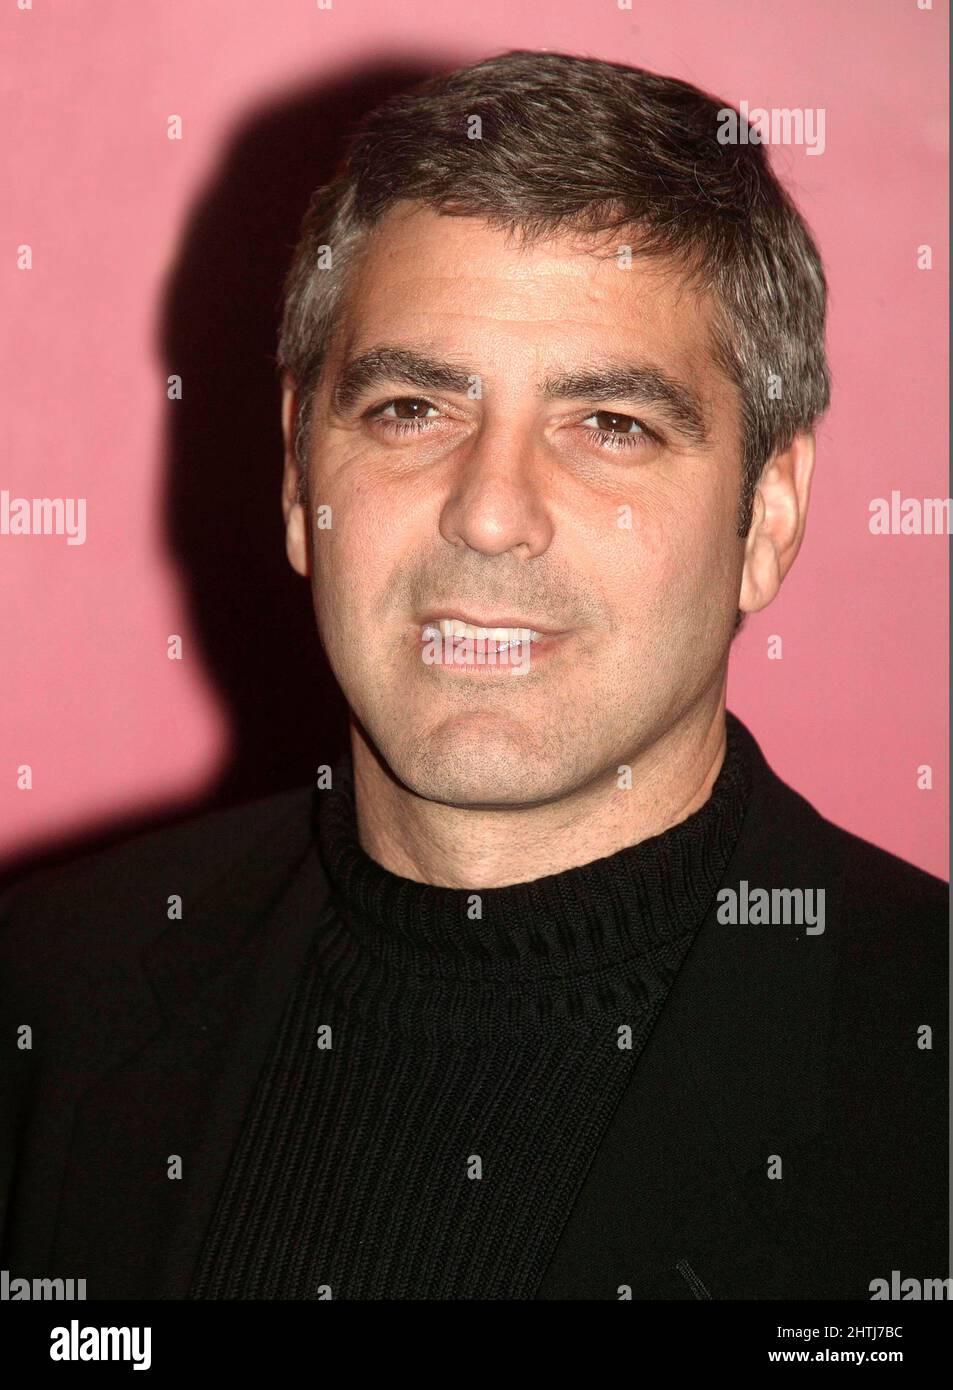 GEORGE CLOONEY AT THE BERLIN FILM FESTIVAL 8TH FEBRUARY 2003 PROMOTING HIS FILM SOLARIS Stock Photo